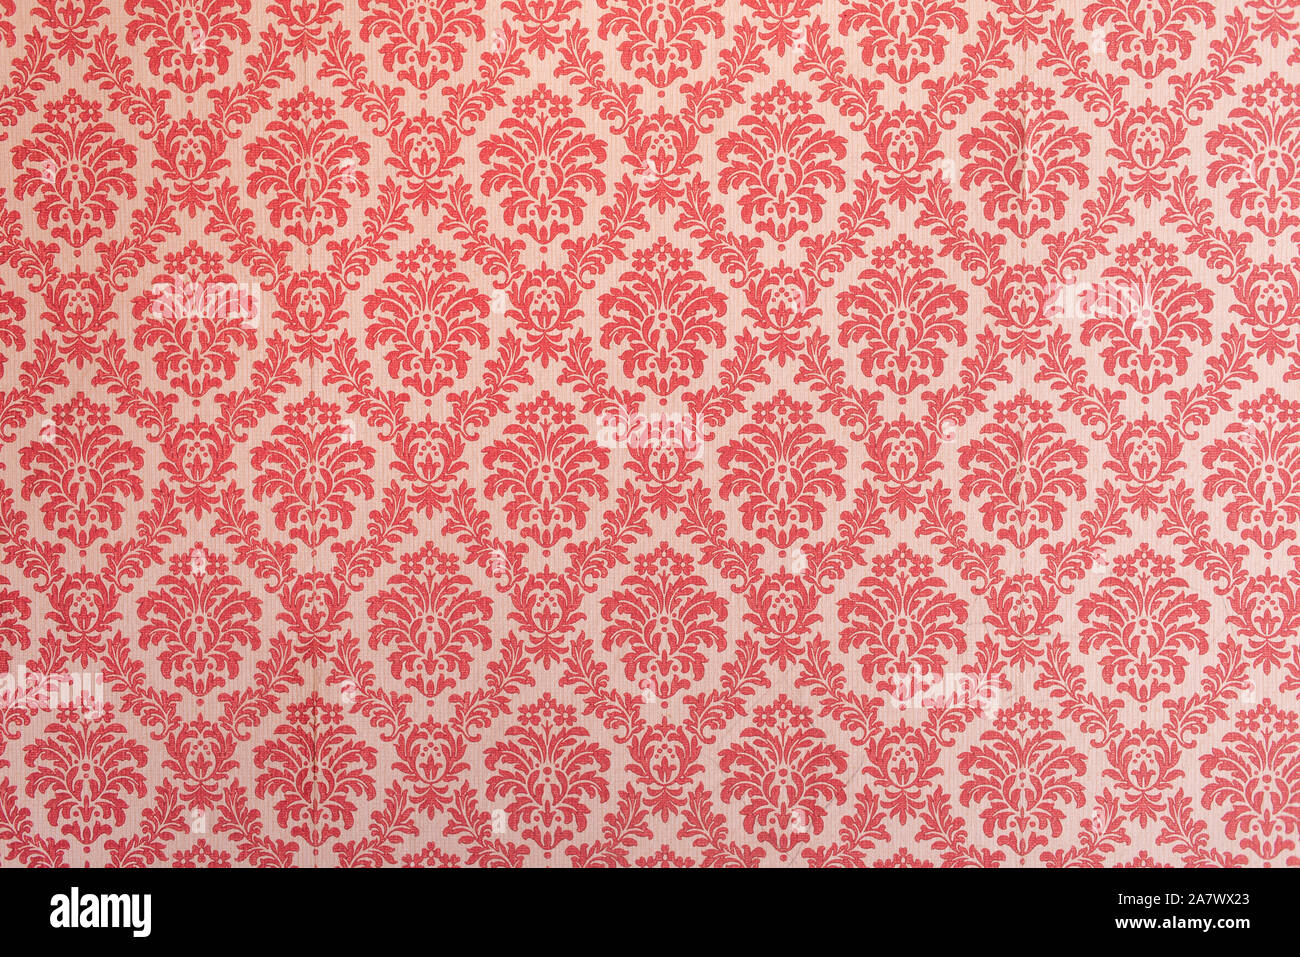 Wallpaper from the 70s: order now stylish wallpaper trends online